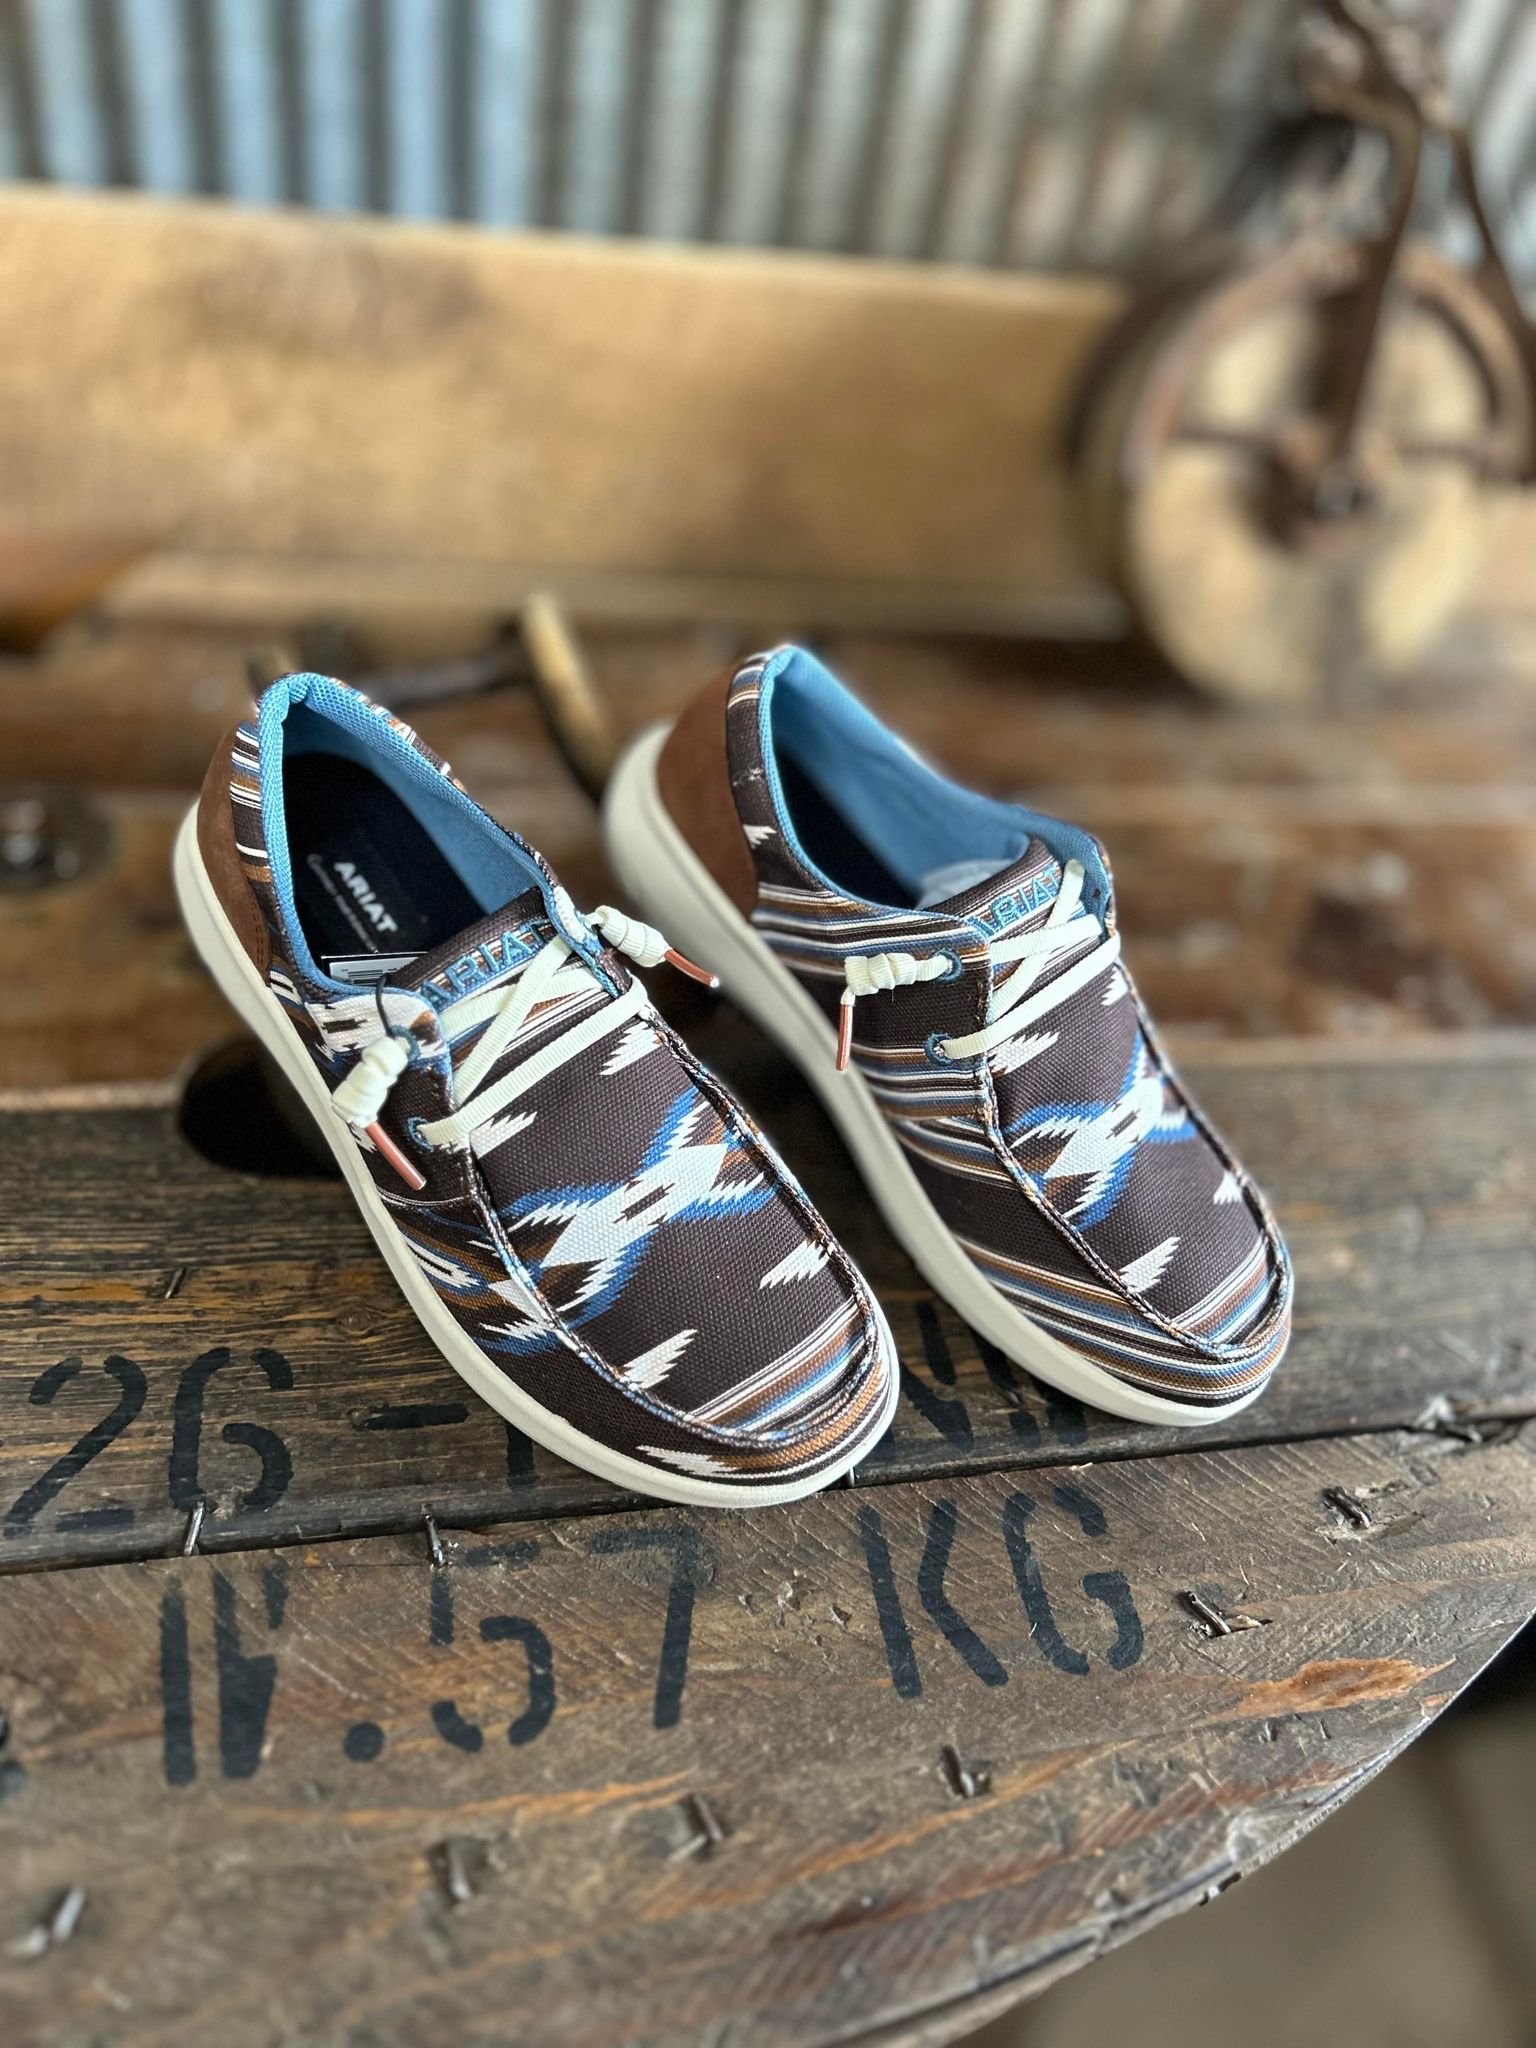 Women's Ariat Arroyo Chimayo Chocolate Hilo-Women's Casual Shoes-Ariat-Lucky J Boots & More, Women's, Men's, & Kids Western Store Located in Carthage, MO